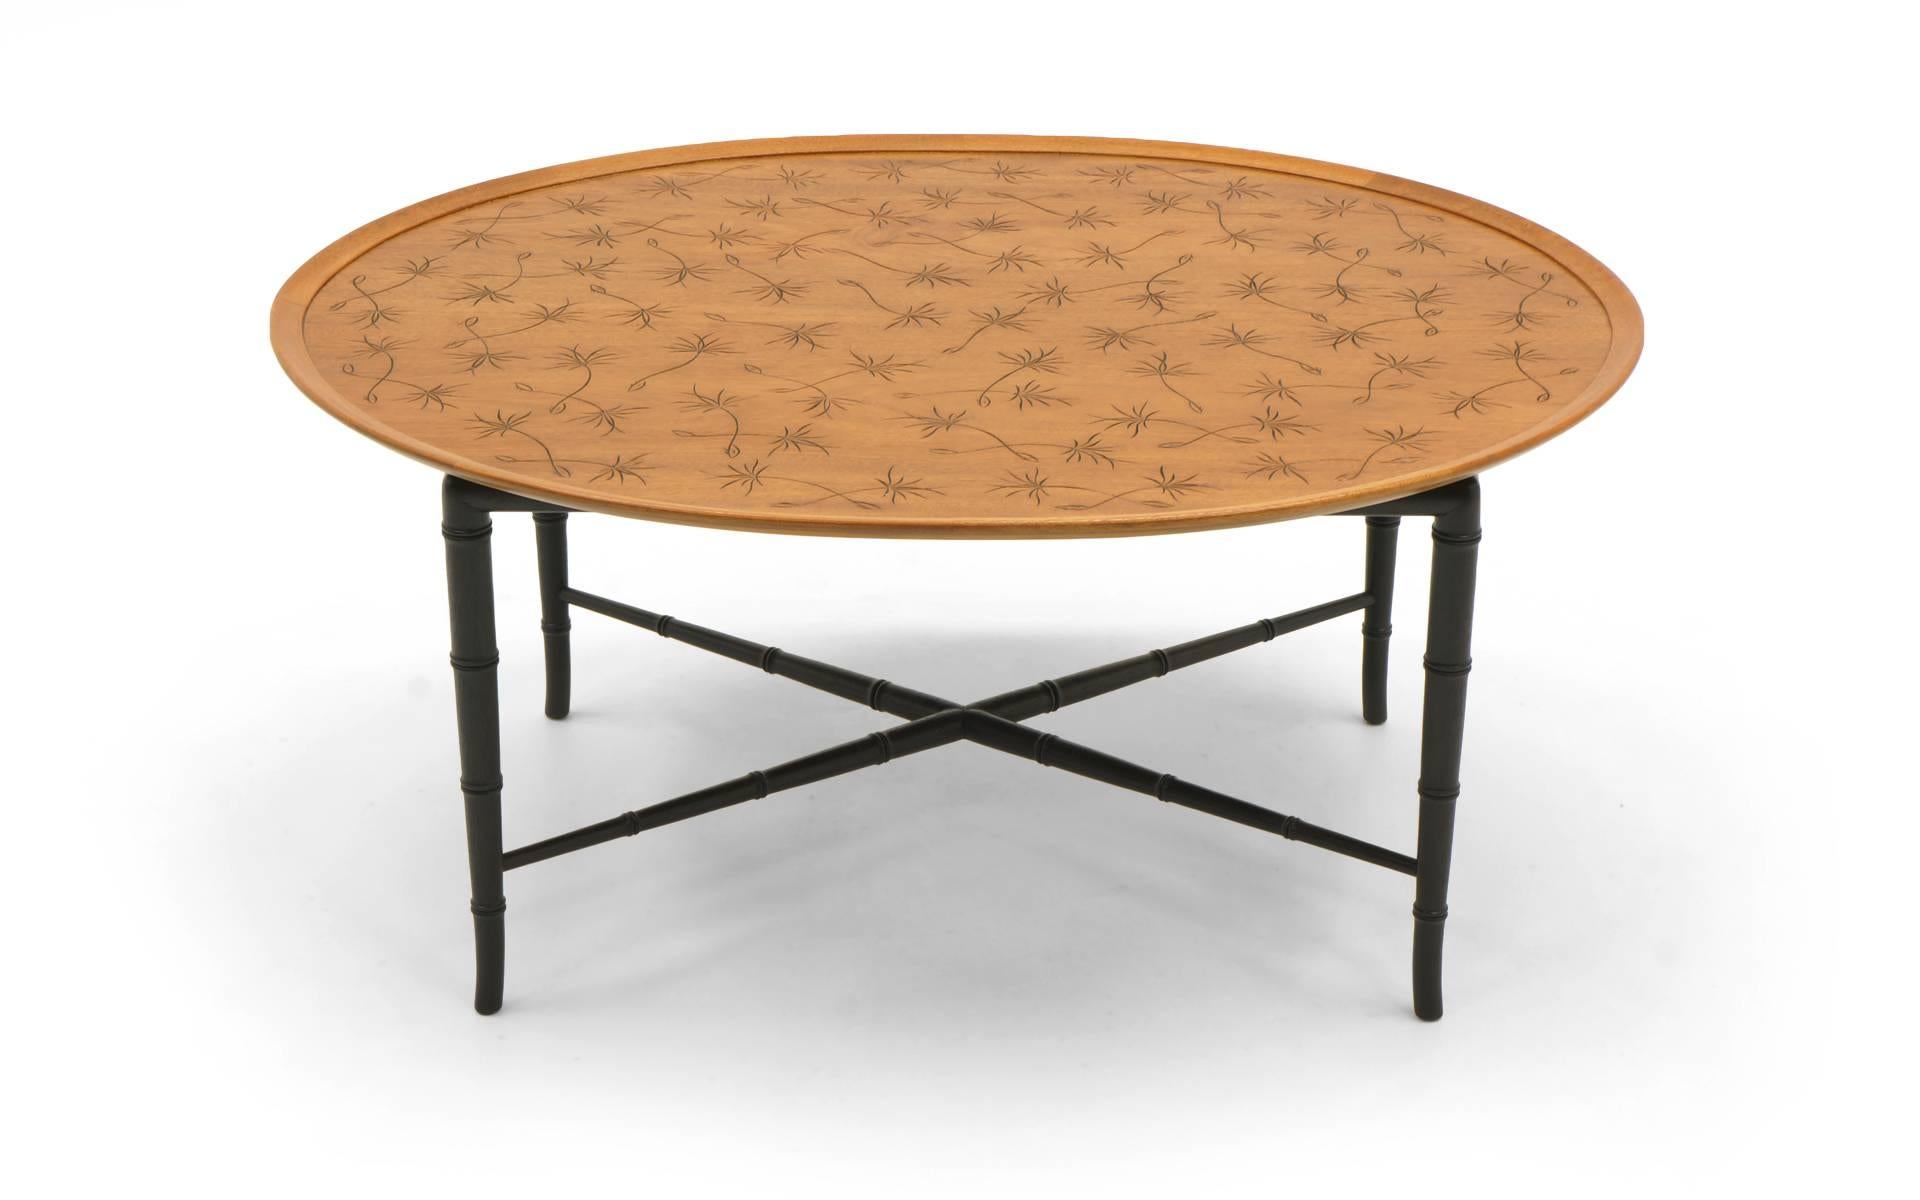 Kittinger coffee table. Beautifully and expertly restored and refinished.